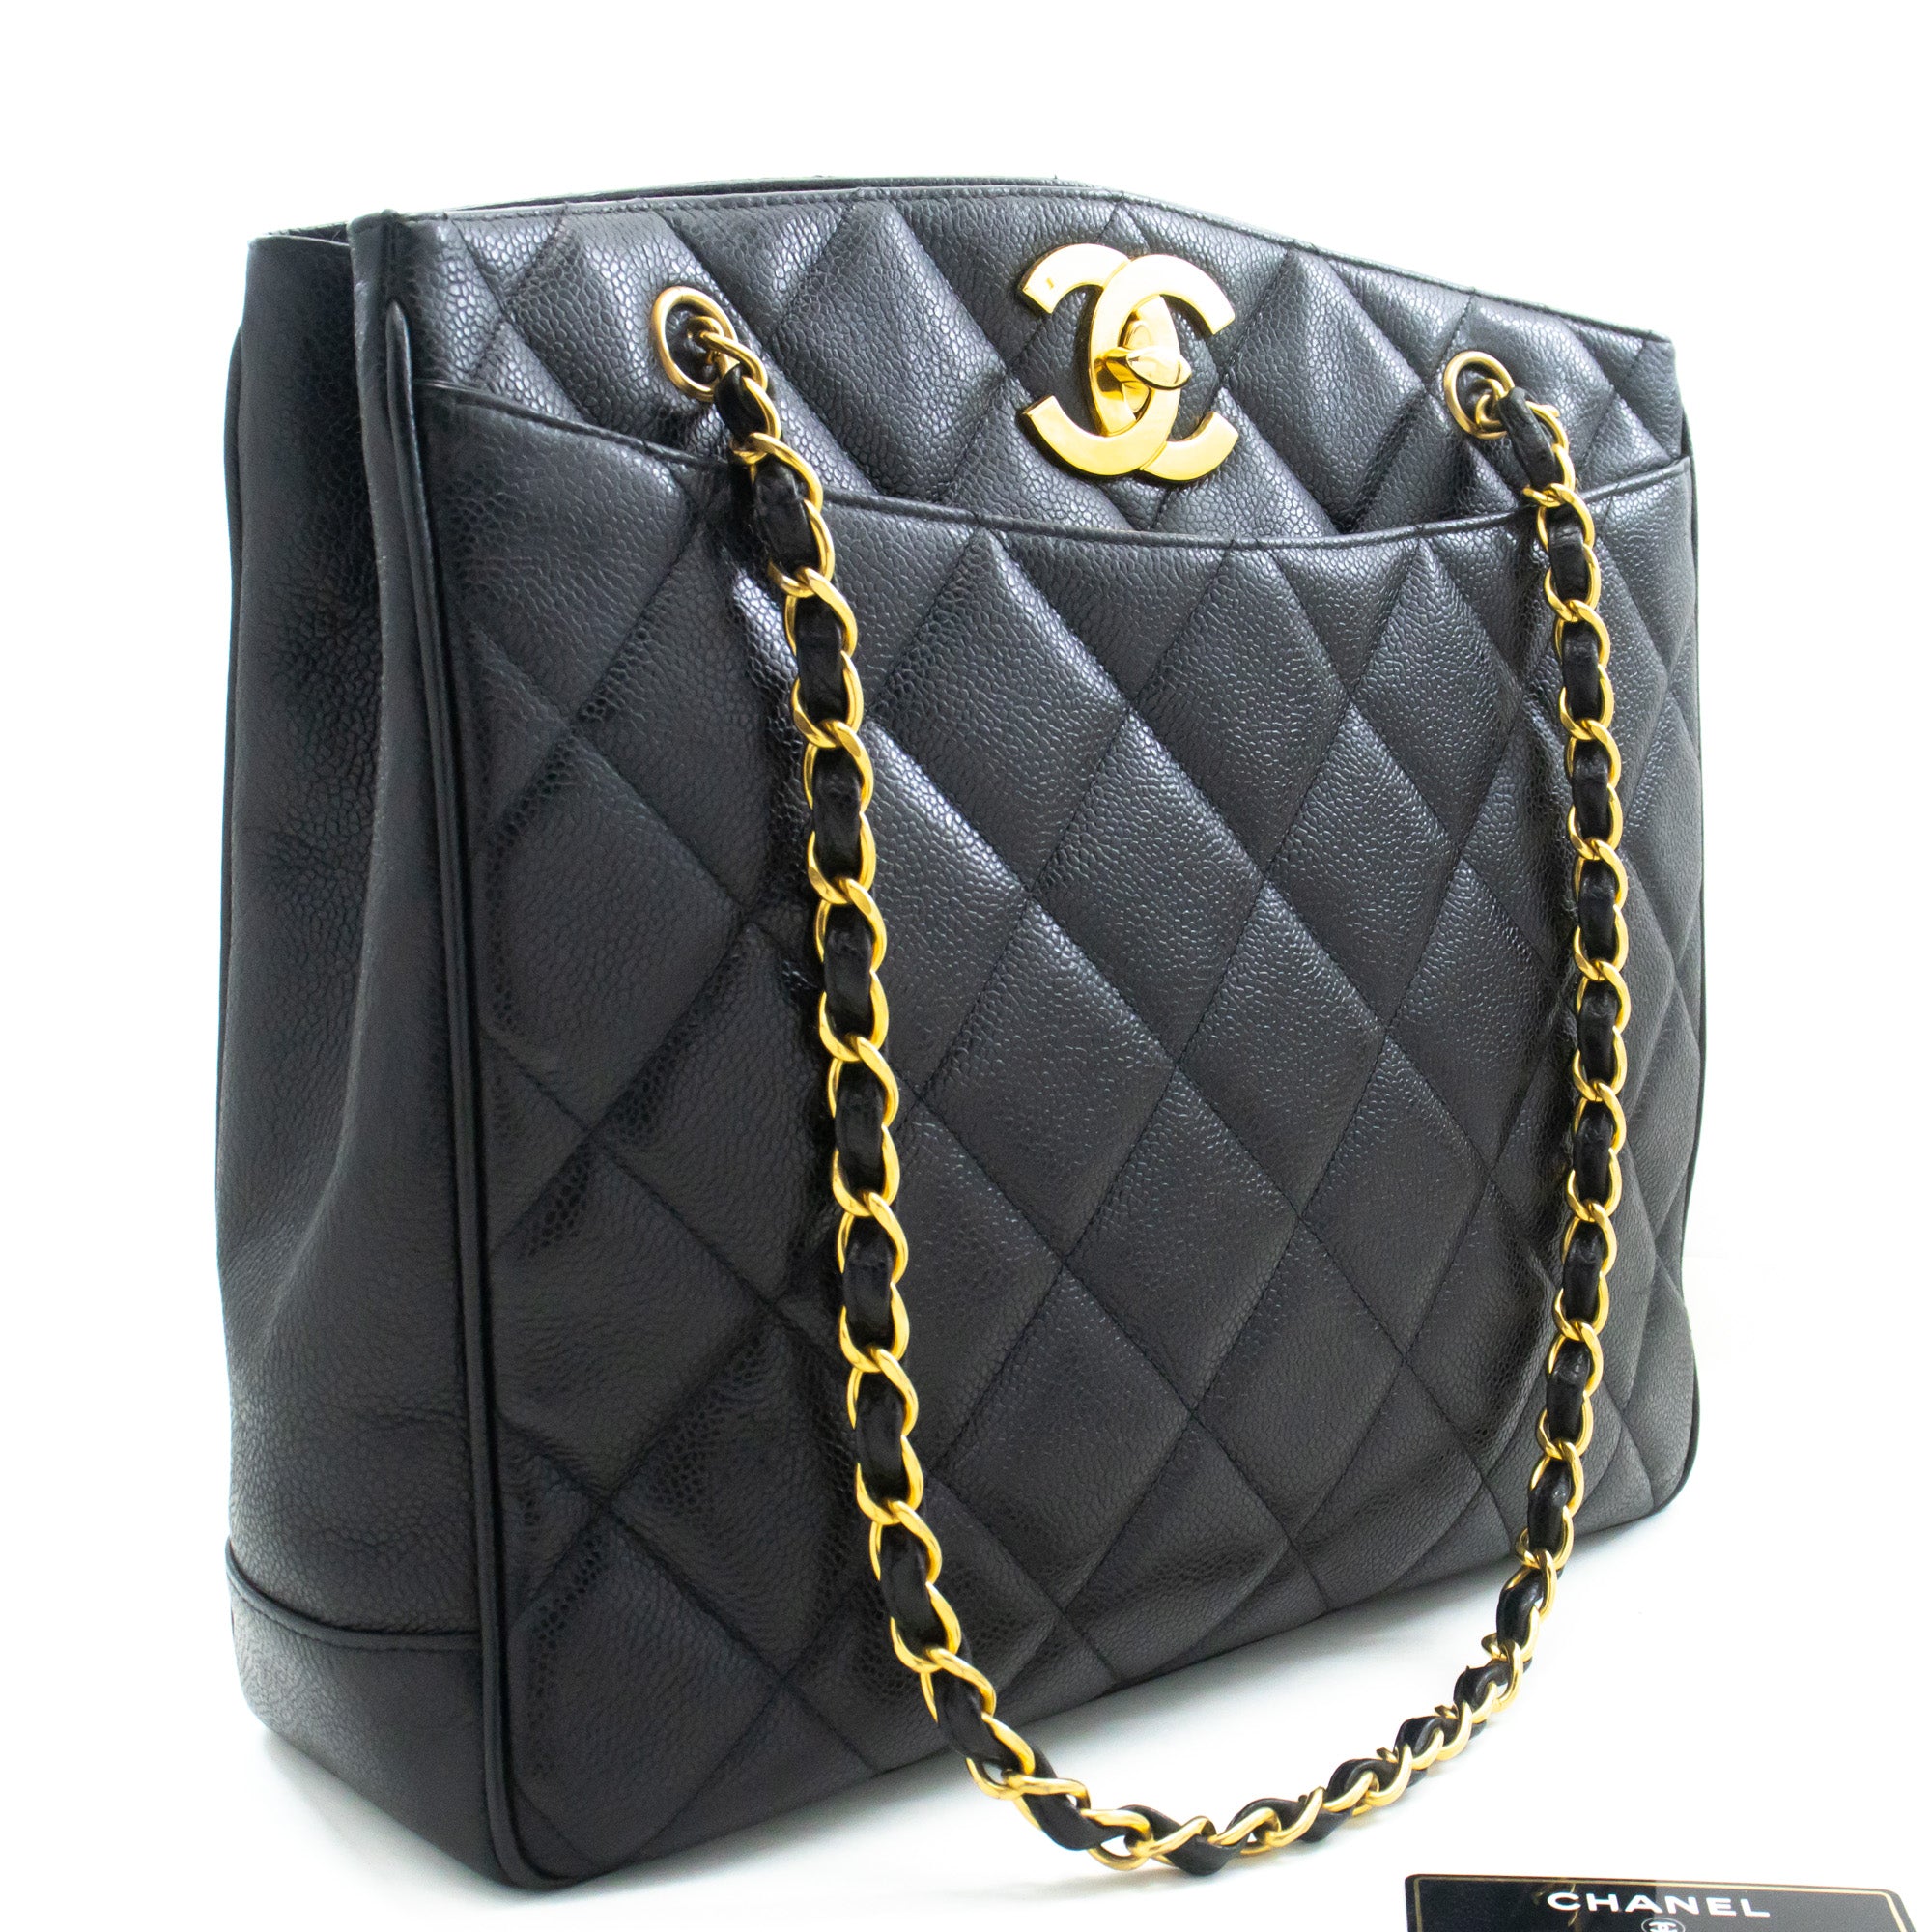 CHANEL Caviar Large Chain Shoulder Bag Black Quilted Leather m22